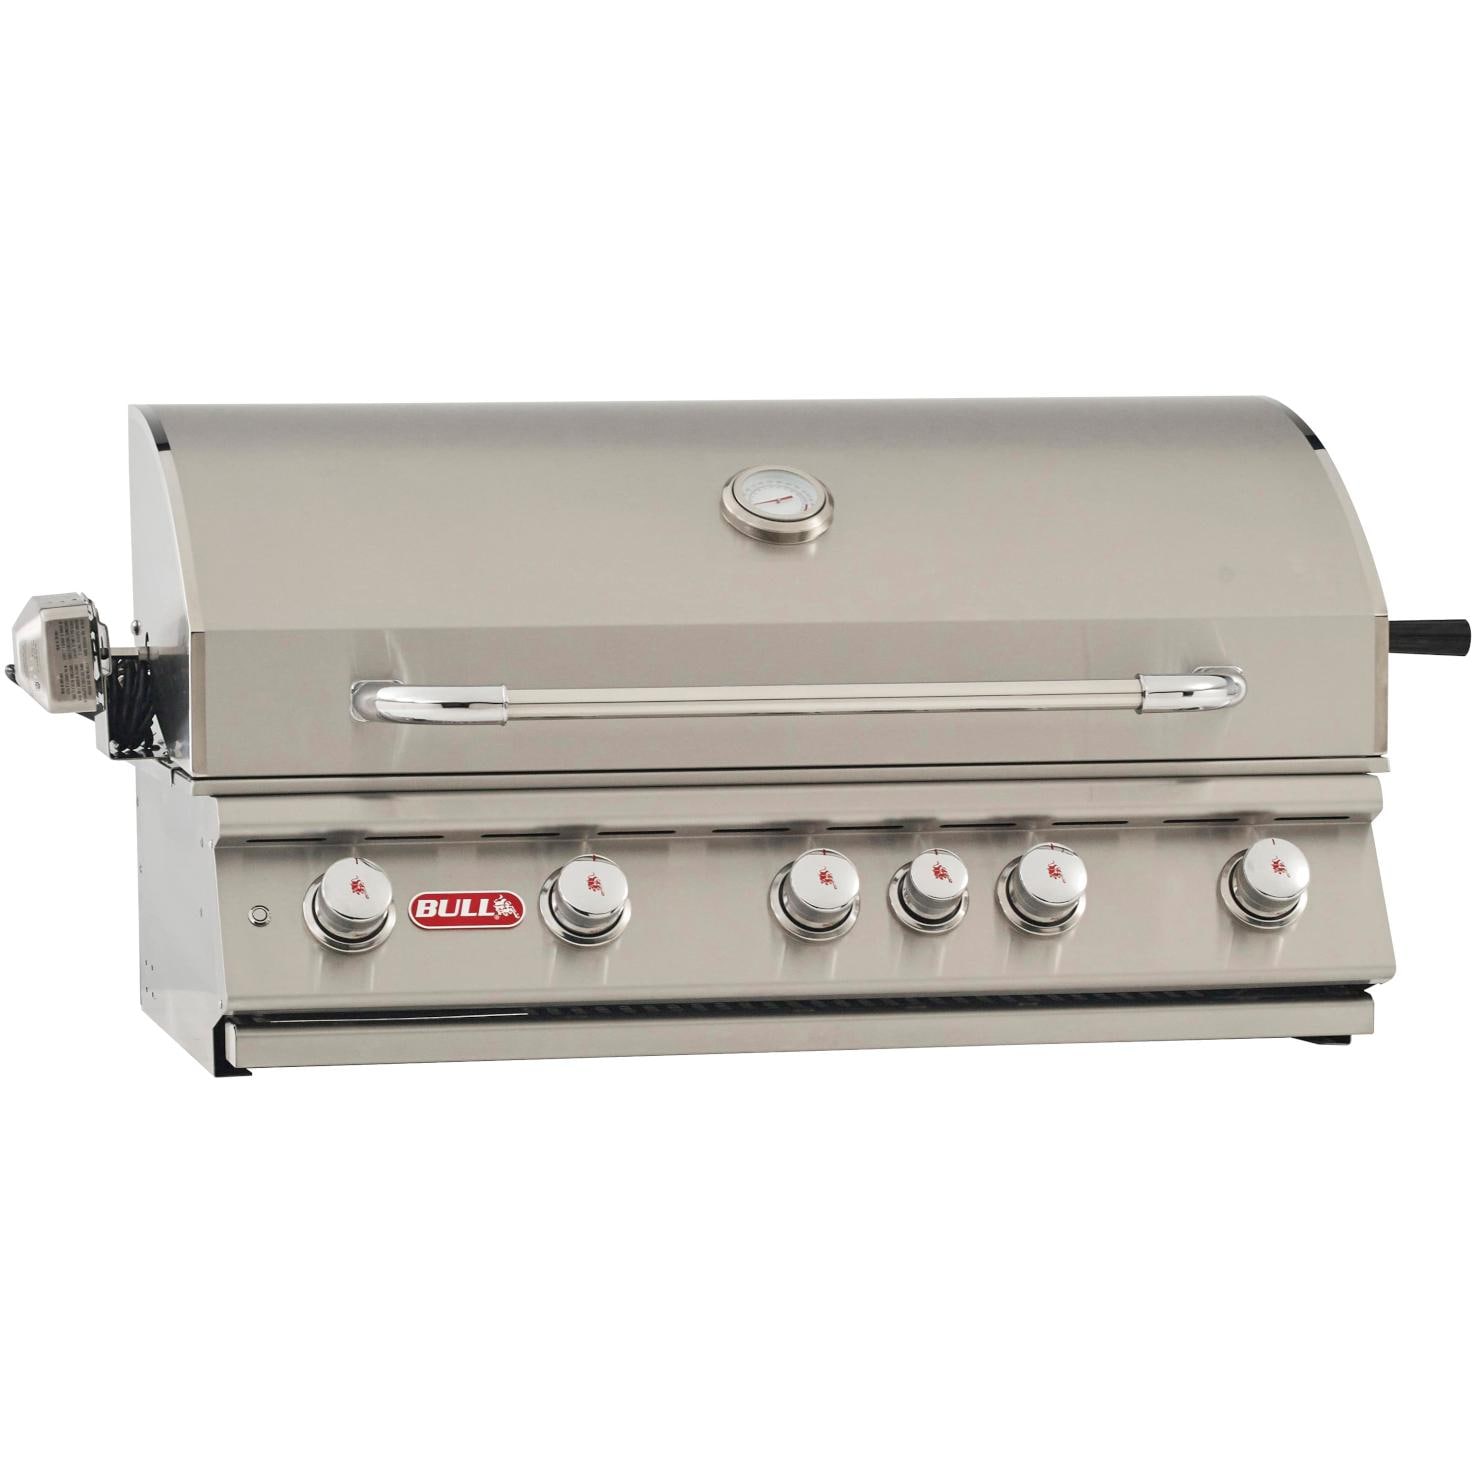 Bull Brahma 38-Inch 5-Burner Built-In Natural Gas Grill With Rotisserie - 57569 - image 1 of 6